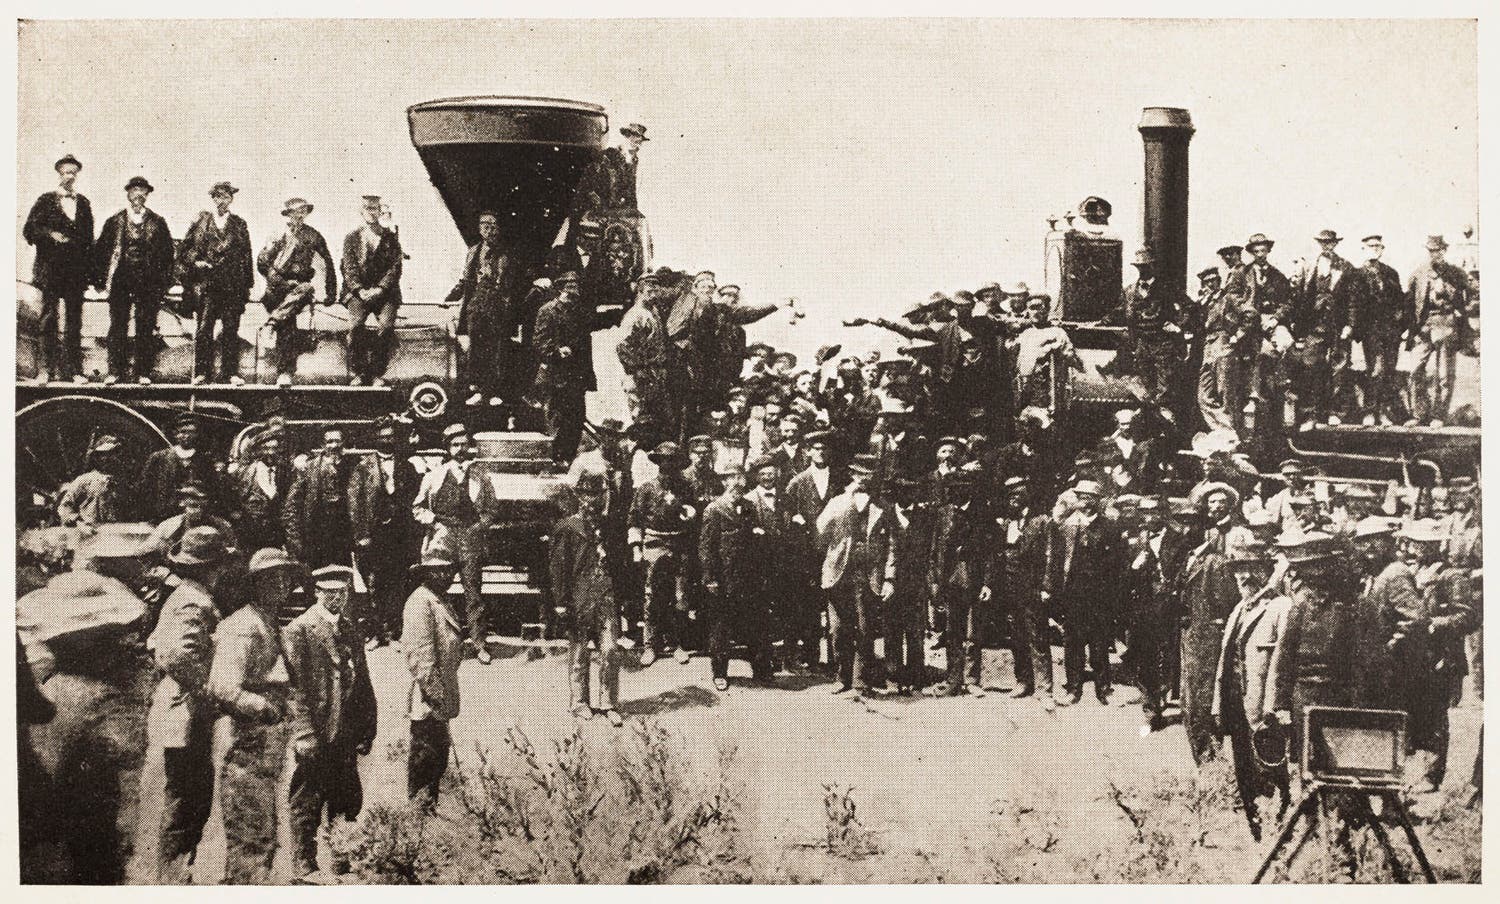 The Central Pacific's engine Jupiter and the Union Pacific's engine No. 119 meet on May 10, 1869, at Promontory Summit, Utah.